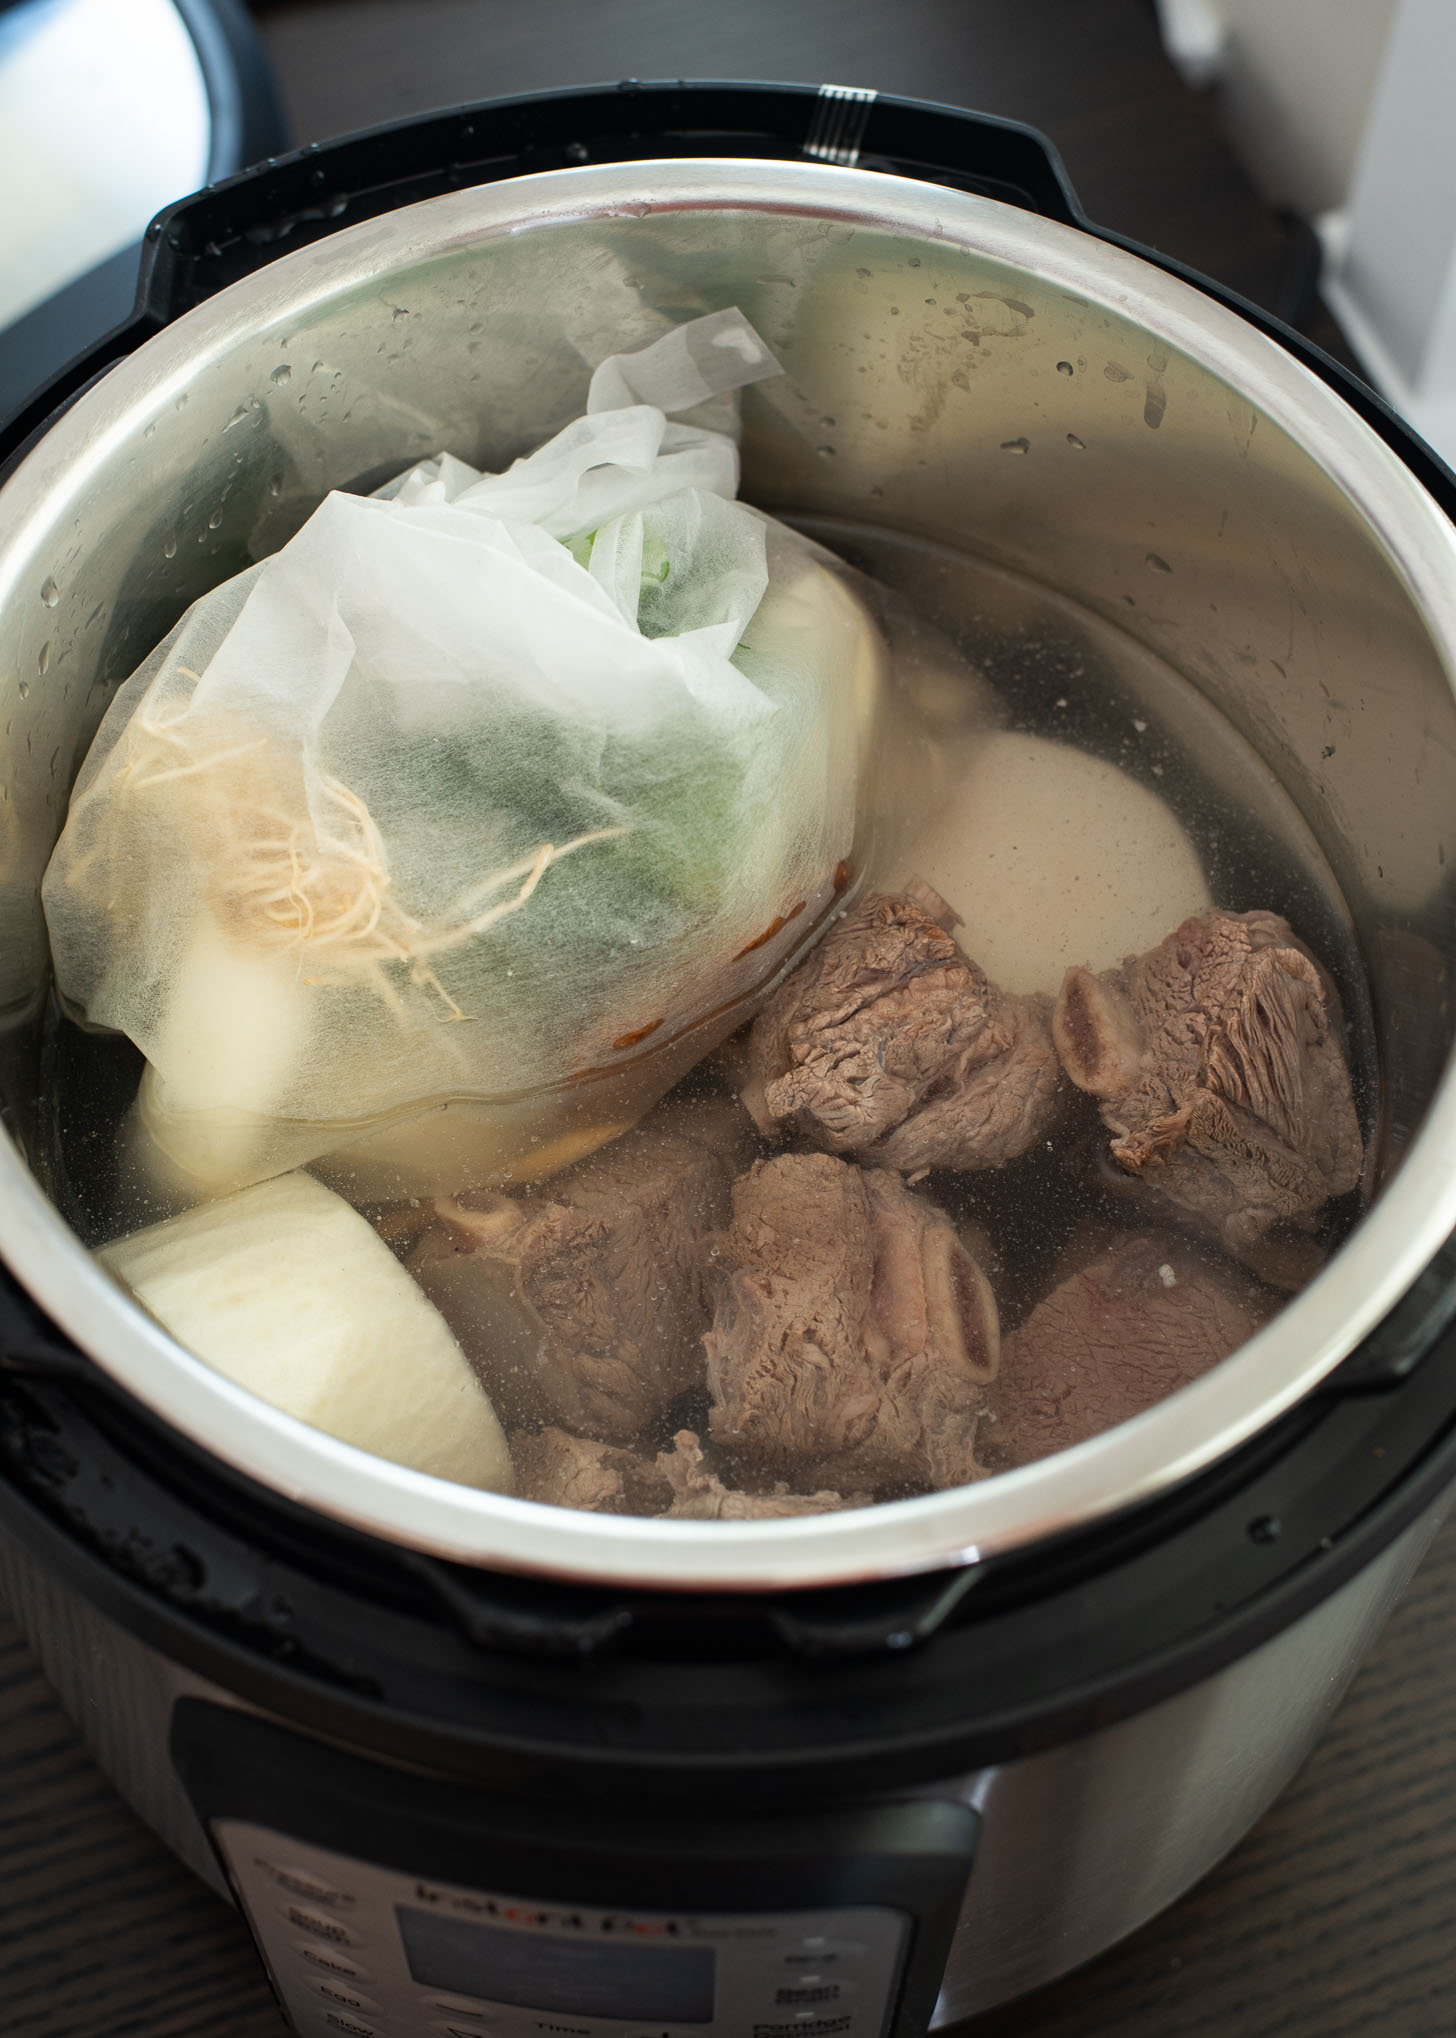 Beef ribs and soup aromatics are placed in an instant pot to start cooking